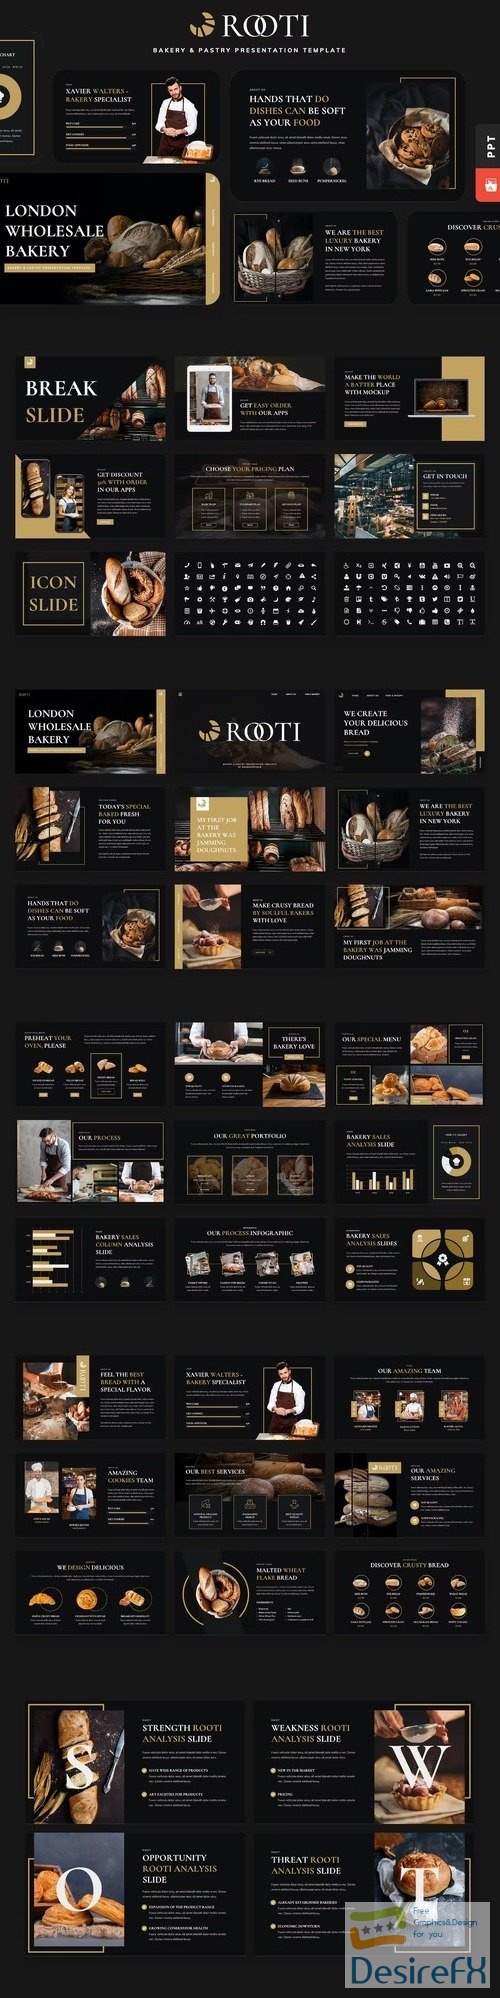 ROOTI - Bakery & Pastry Powerpoint Template